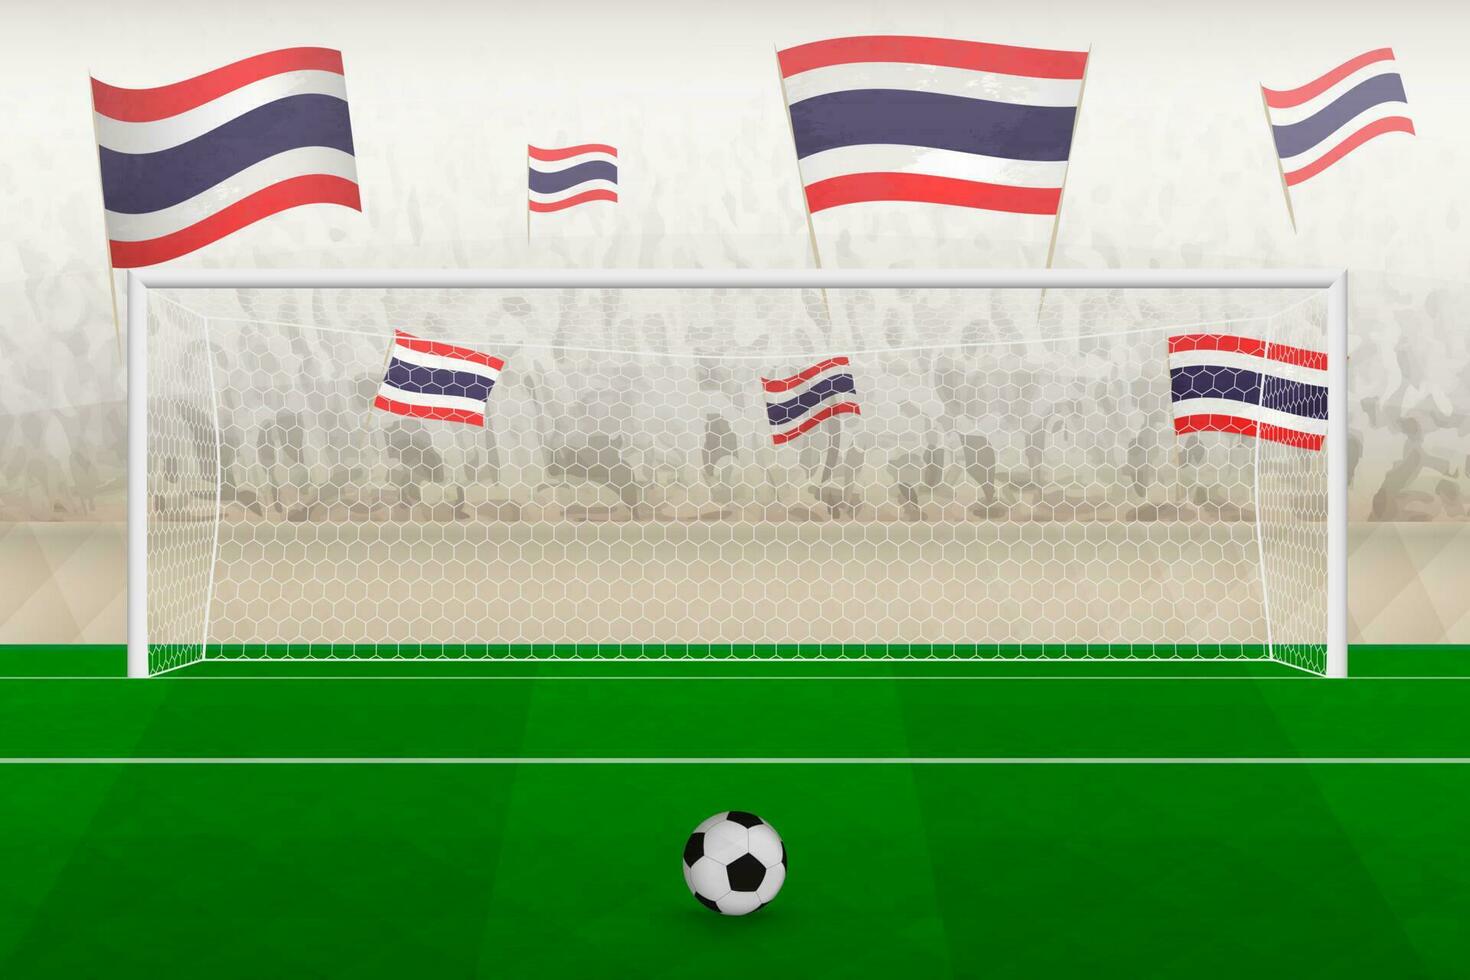 Thailand football team fans with flags of Thailand cheering on stadium, penalty kick concept in a soccer match. vector